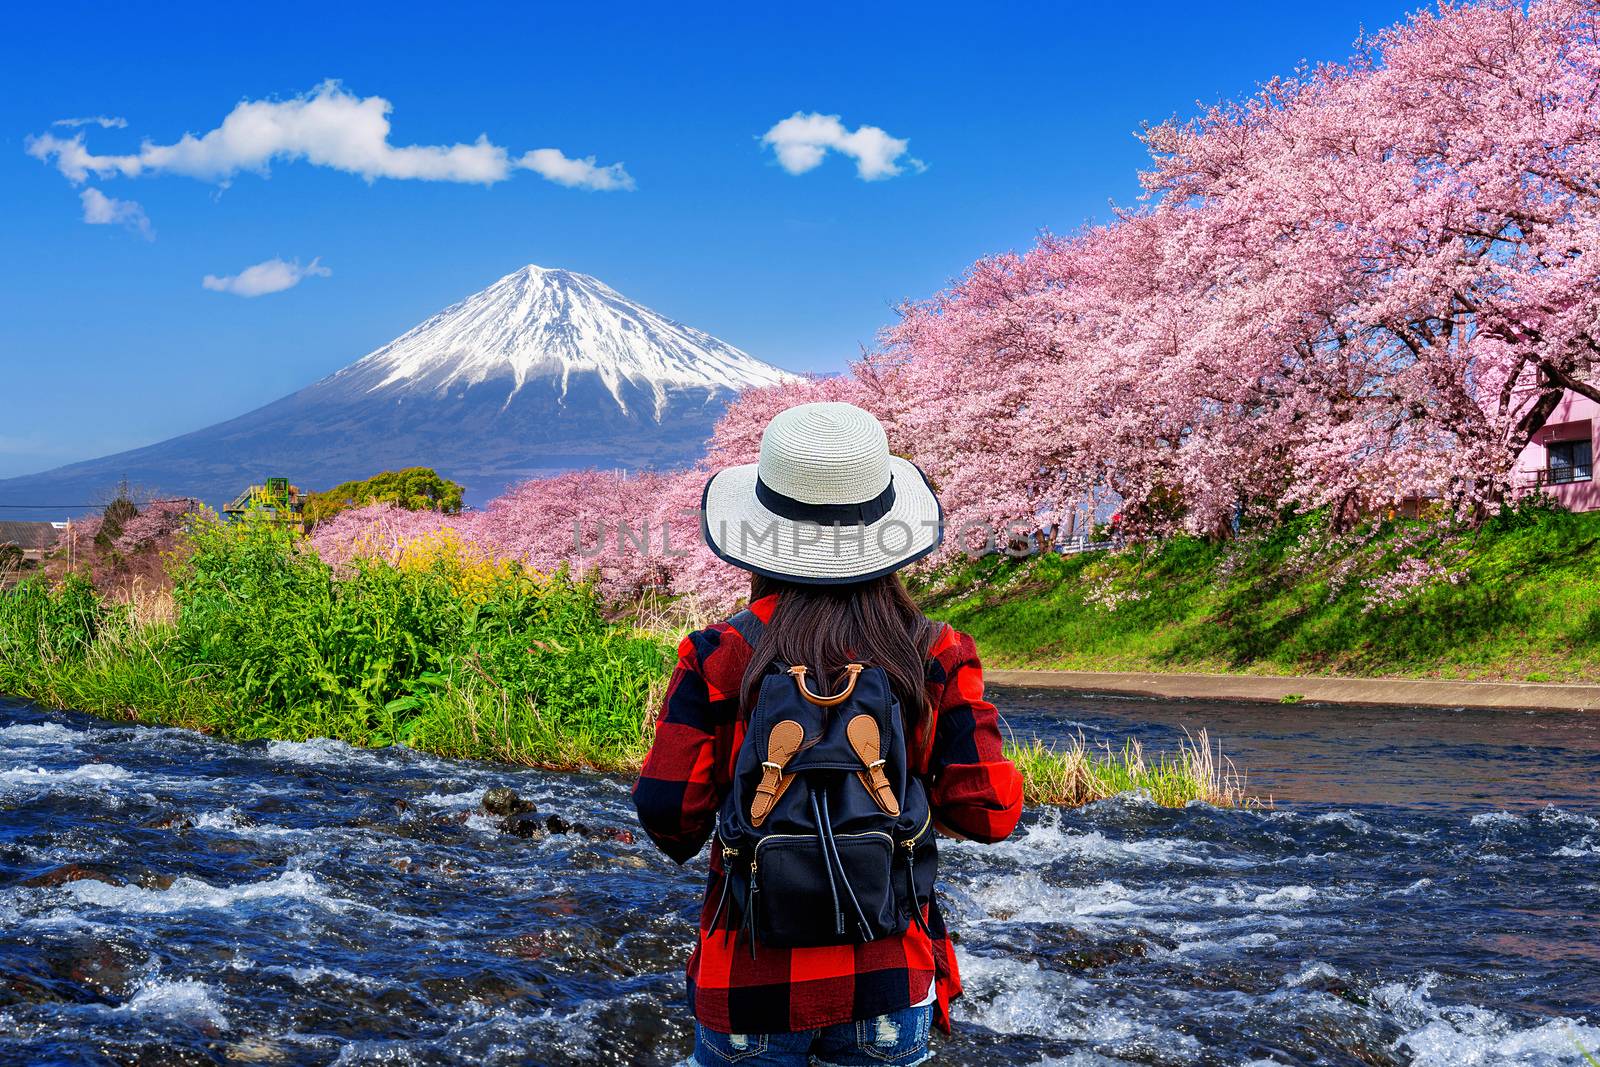 Tourist looking at cherry blossoms and fuji mountains in Shizuoka, Japan.